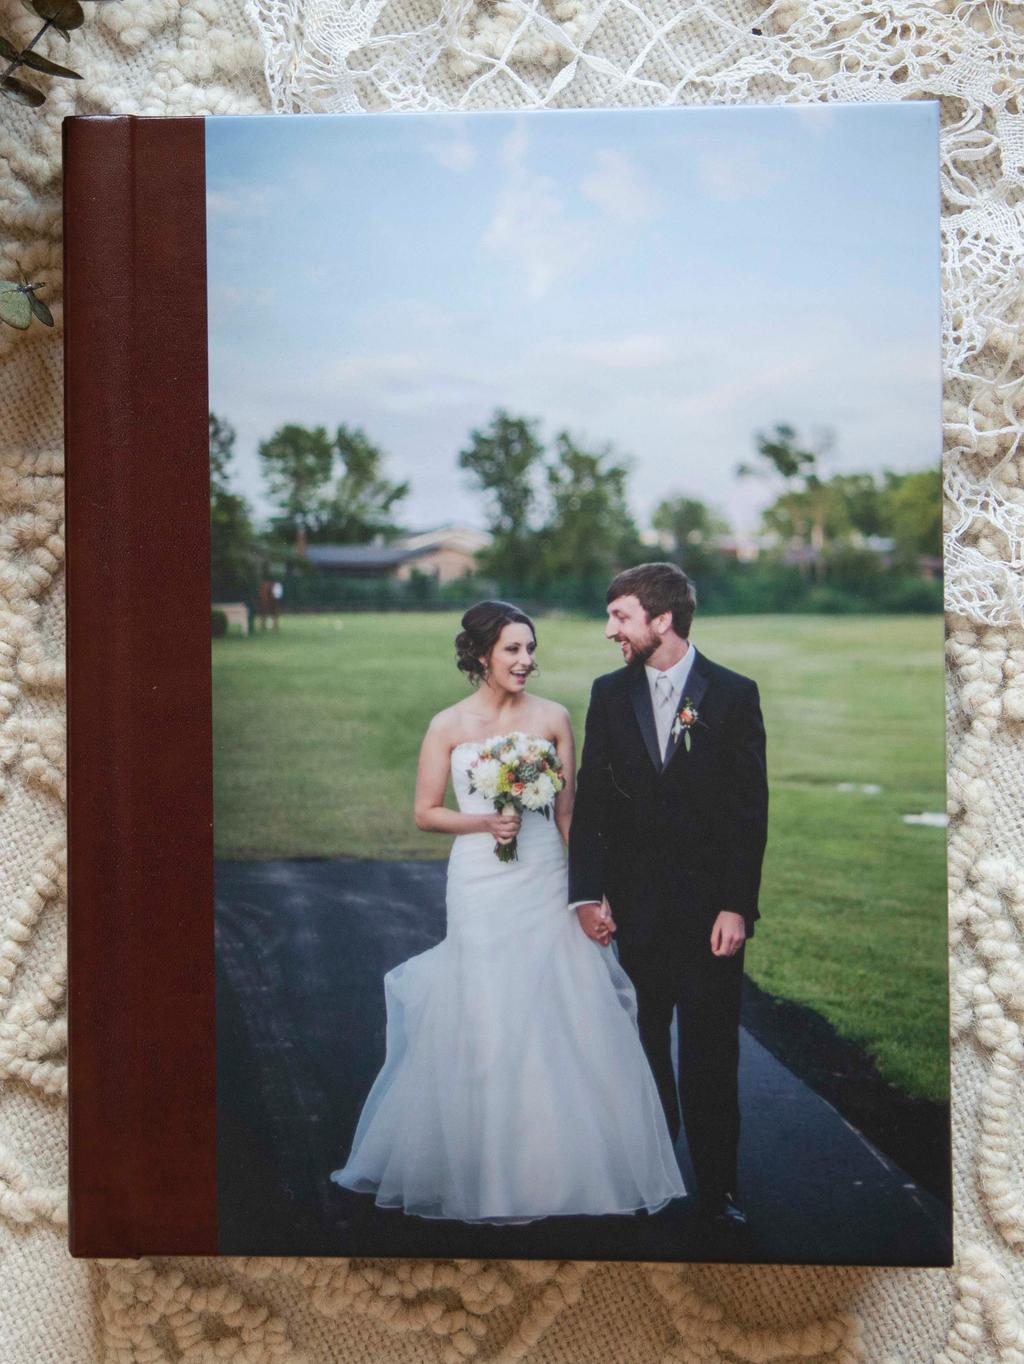 COVER OPTIONS 9x12 Split Cover with Bonded Leather Burgundy Twig and Olive Photography THE SPLIT COVER BONDED LEATHER, ART CLOTH, LINEN The Split Cover features your choice of the Bonded Leather, Art